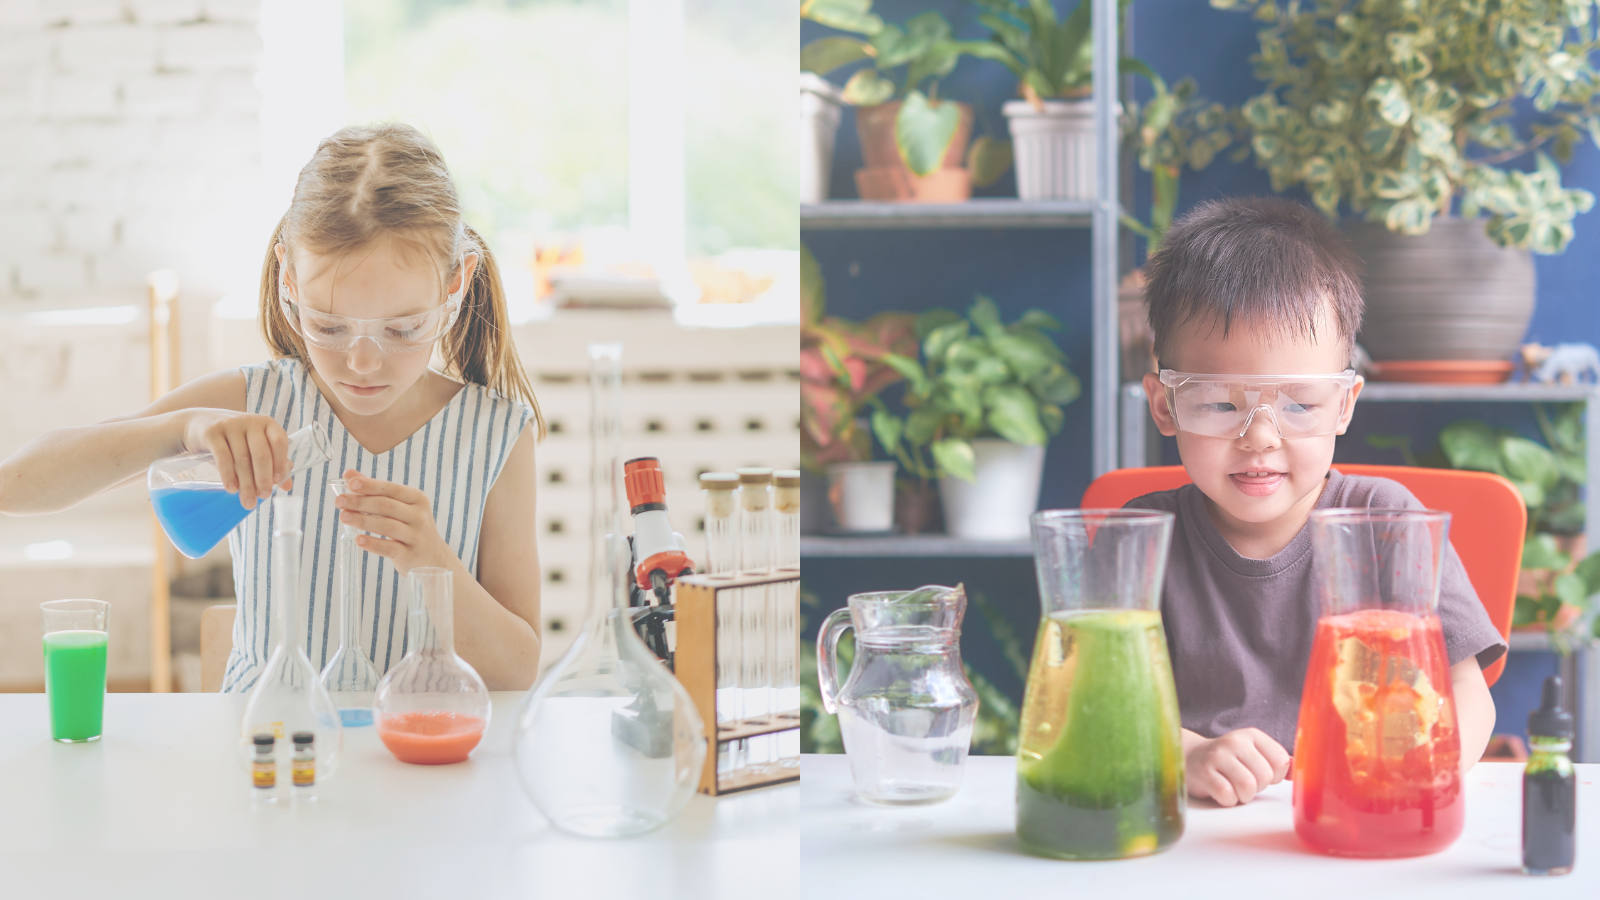 young girl pouring into beaker; young boy looking at beakers